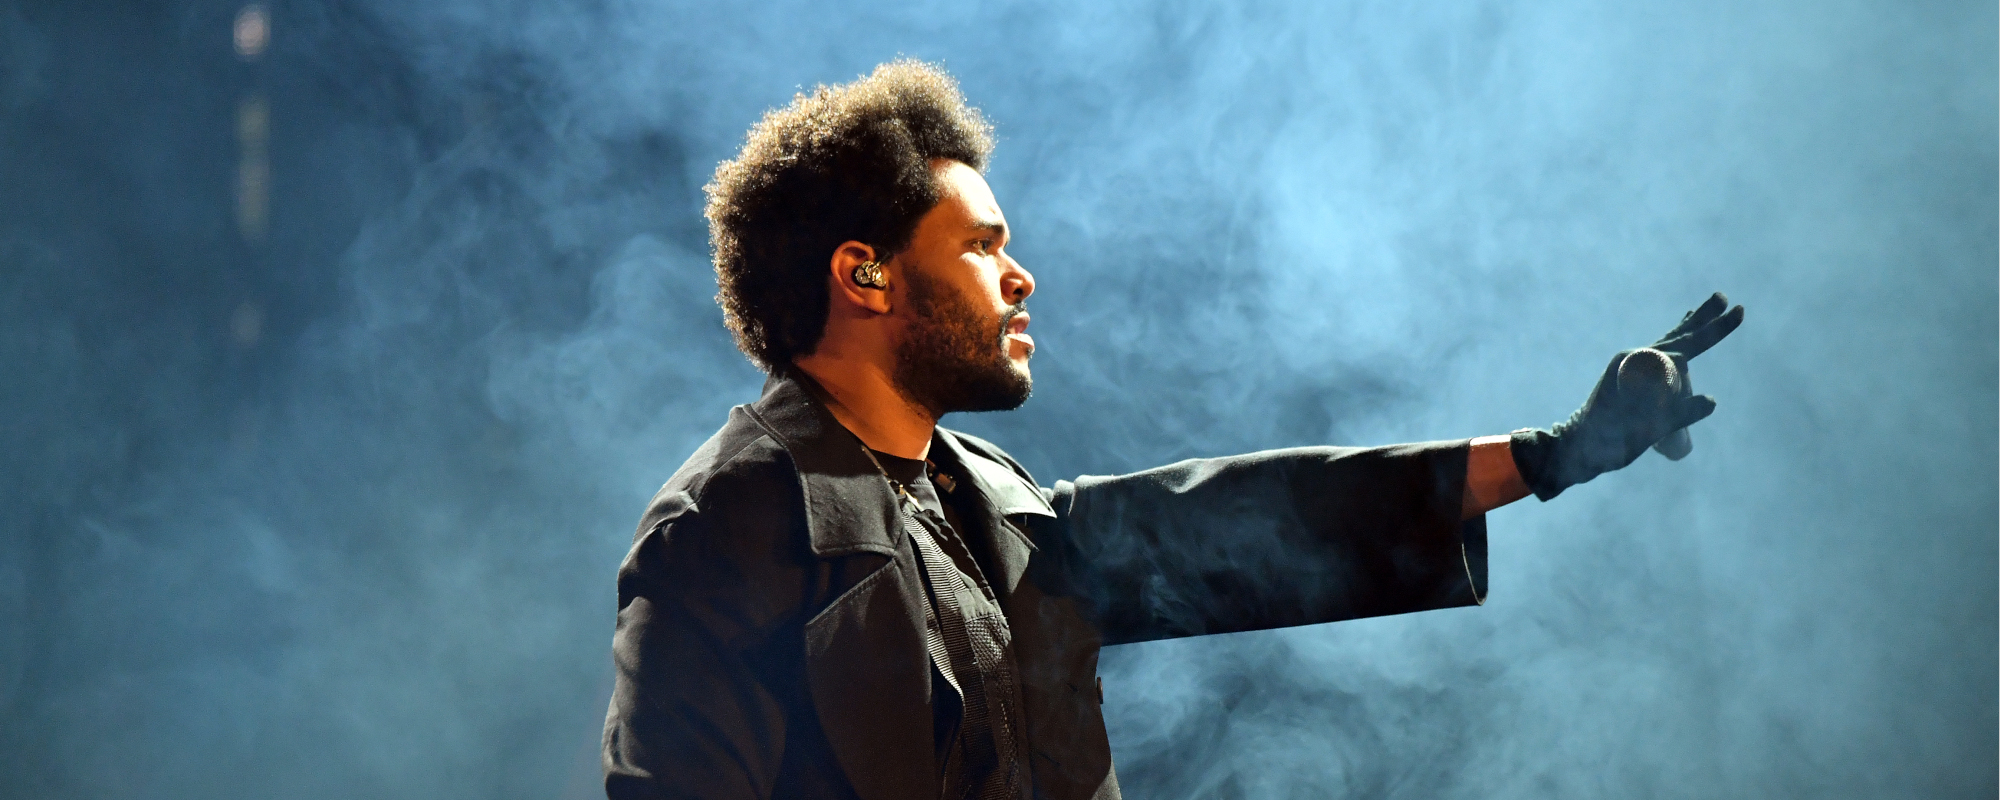 The Weeknd Adds Two Songs to ‘The Idol’ Soundtrack